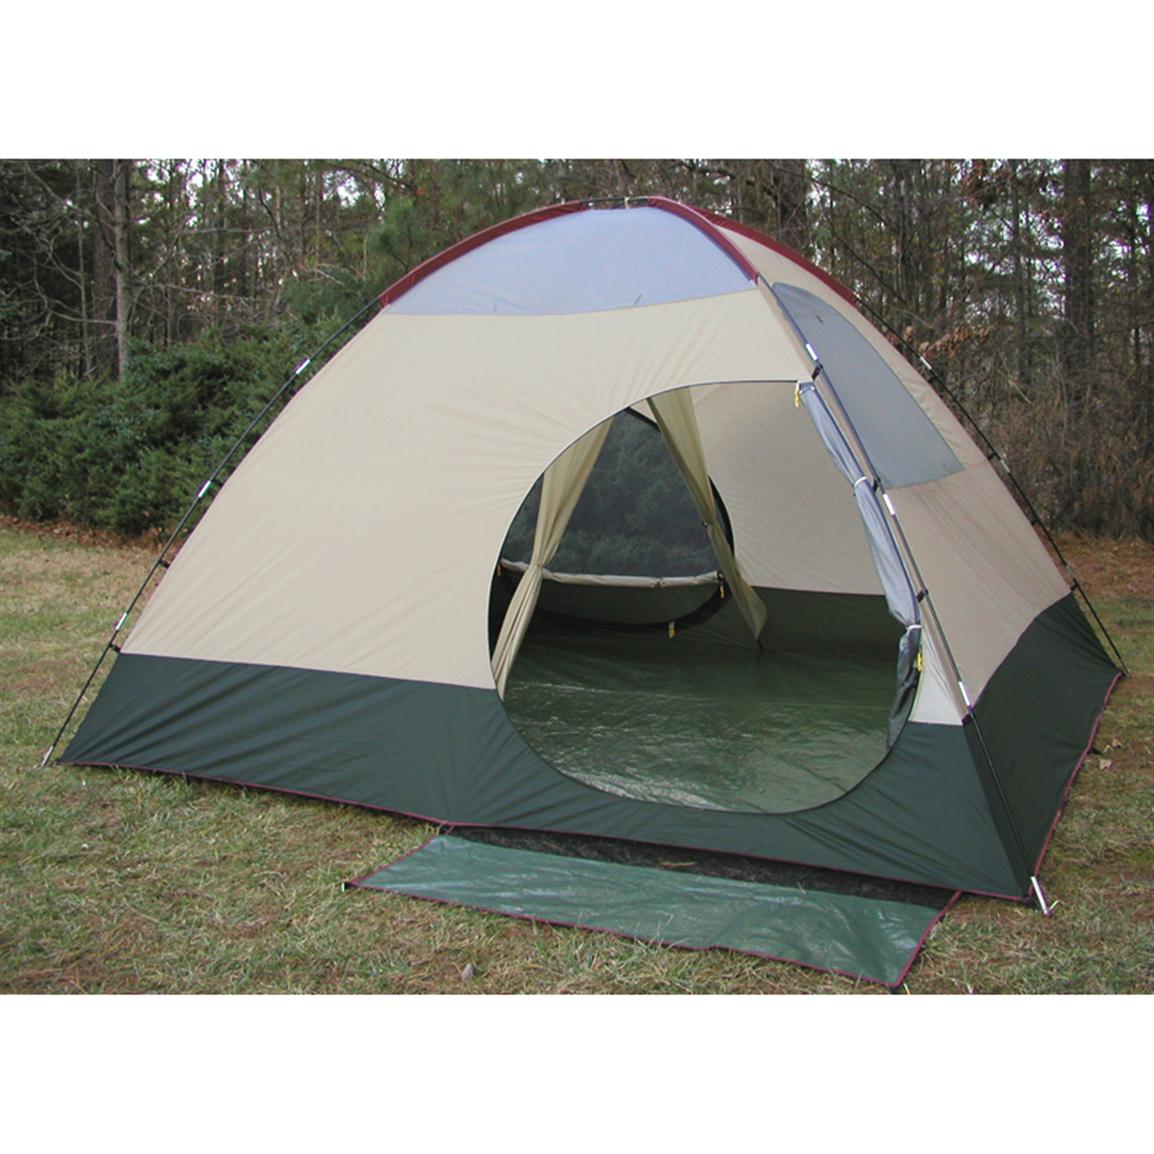 12x10' Tall Boy Dome Tent - 89094, Backpacking Tents at Sportsman's Guide